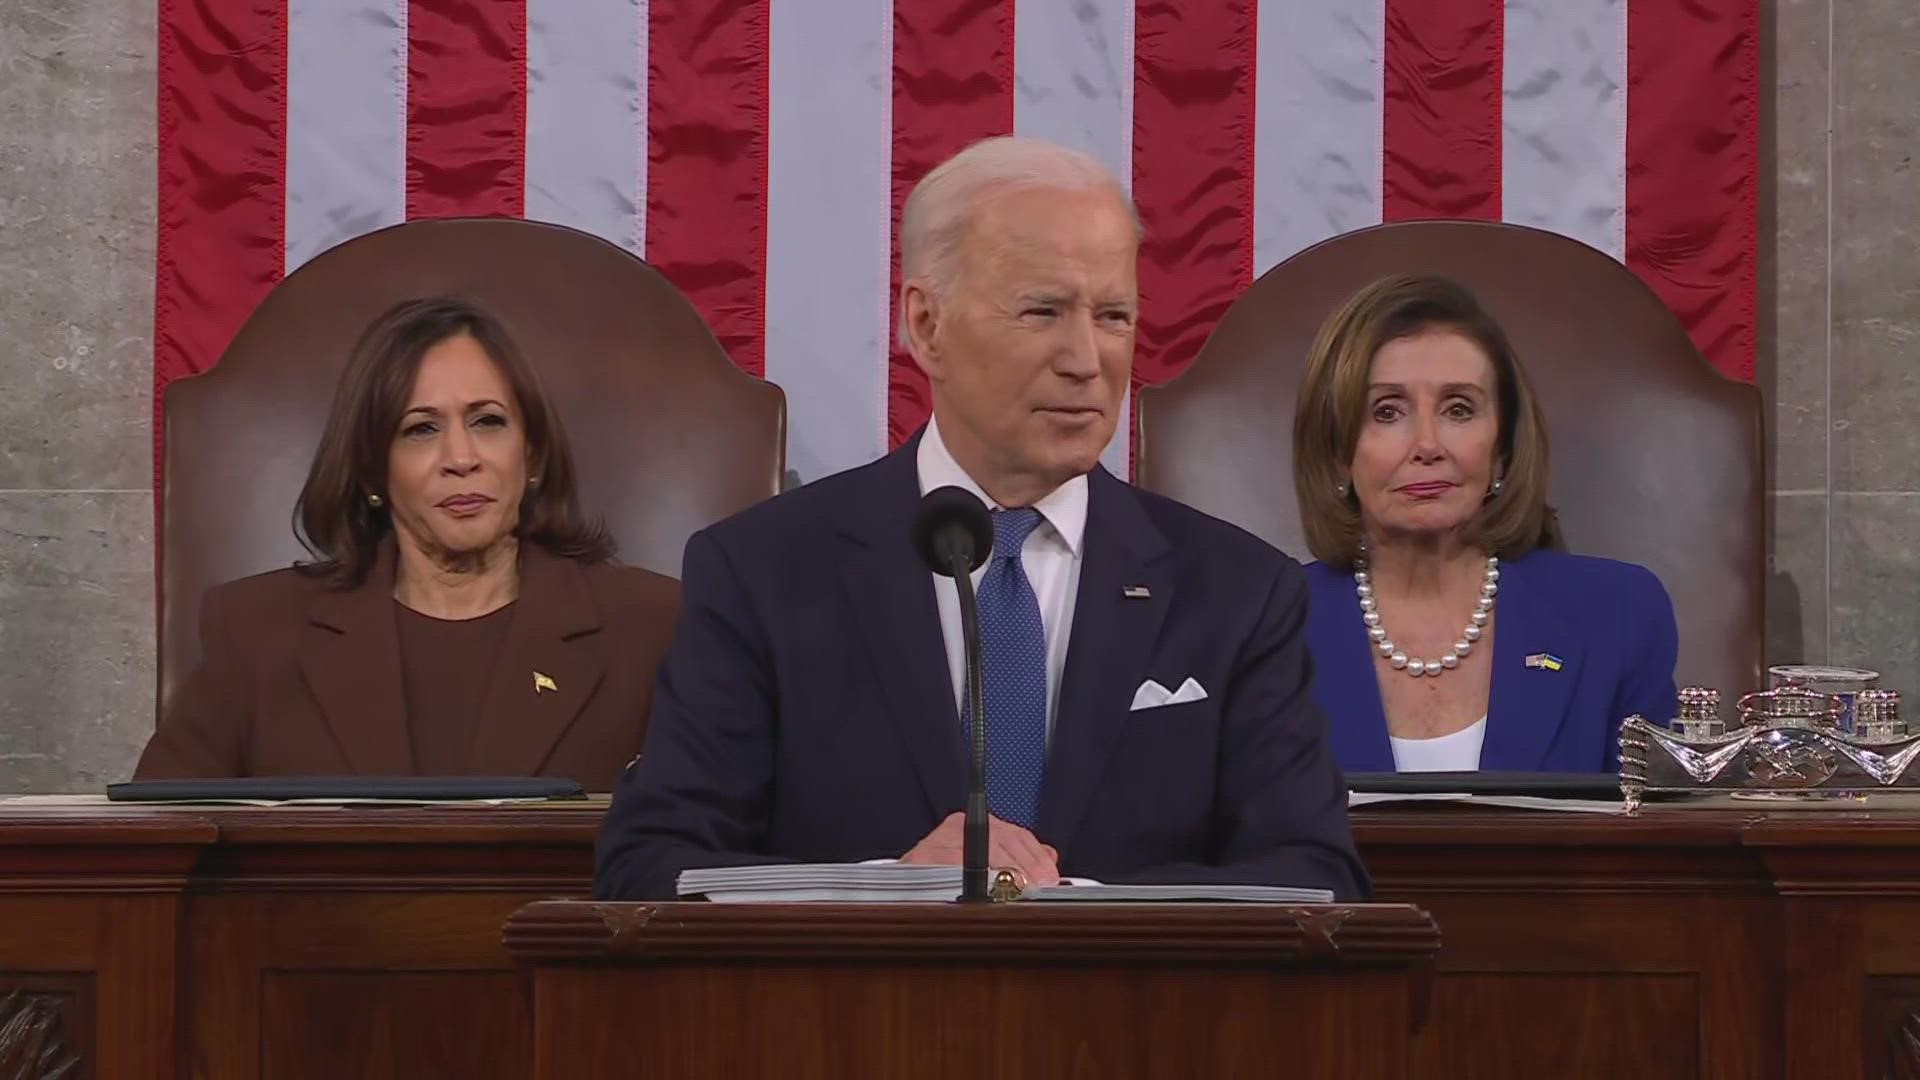 President Joe Biden also used the moment to criticize the Trump administration's tax-cut bill, which prompted boos from GOP lawmakers.